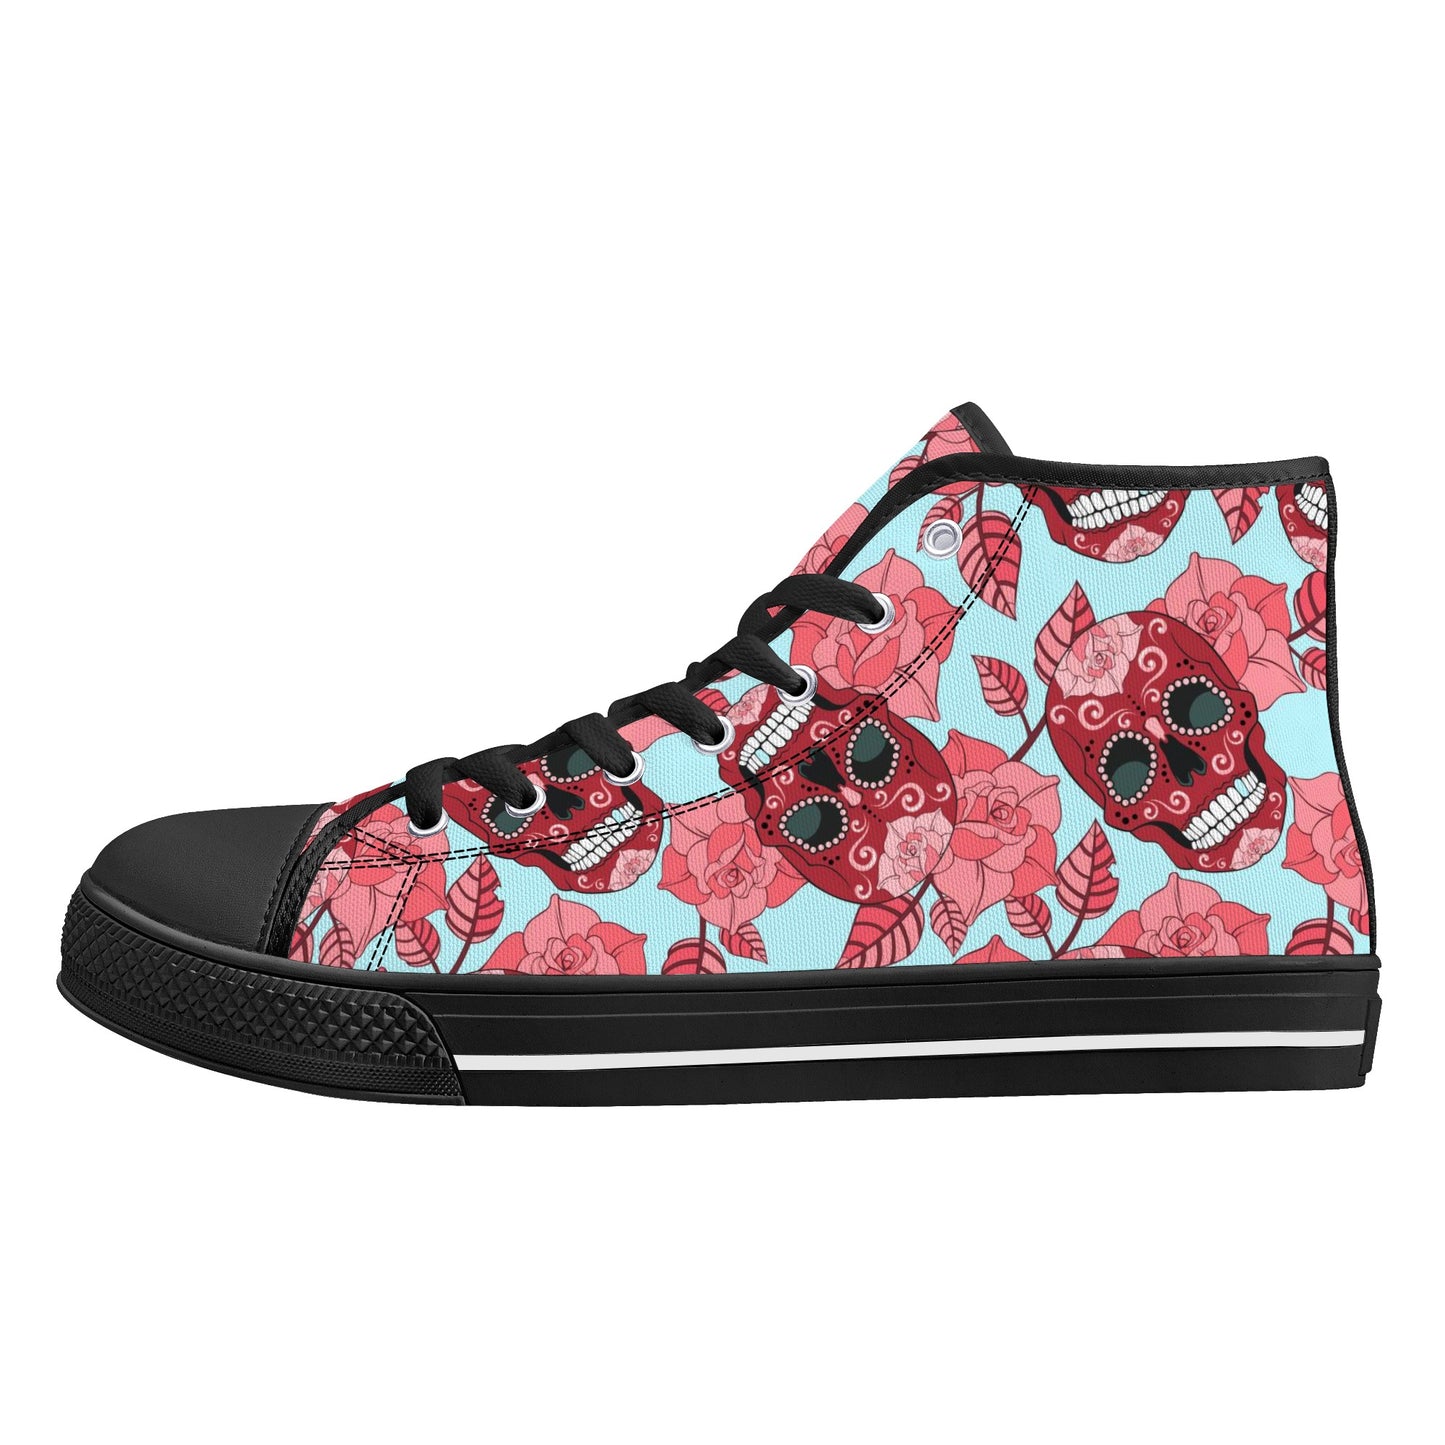 Men's High Top Canvas Shoes With Customized Tongue